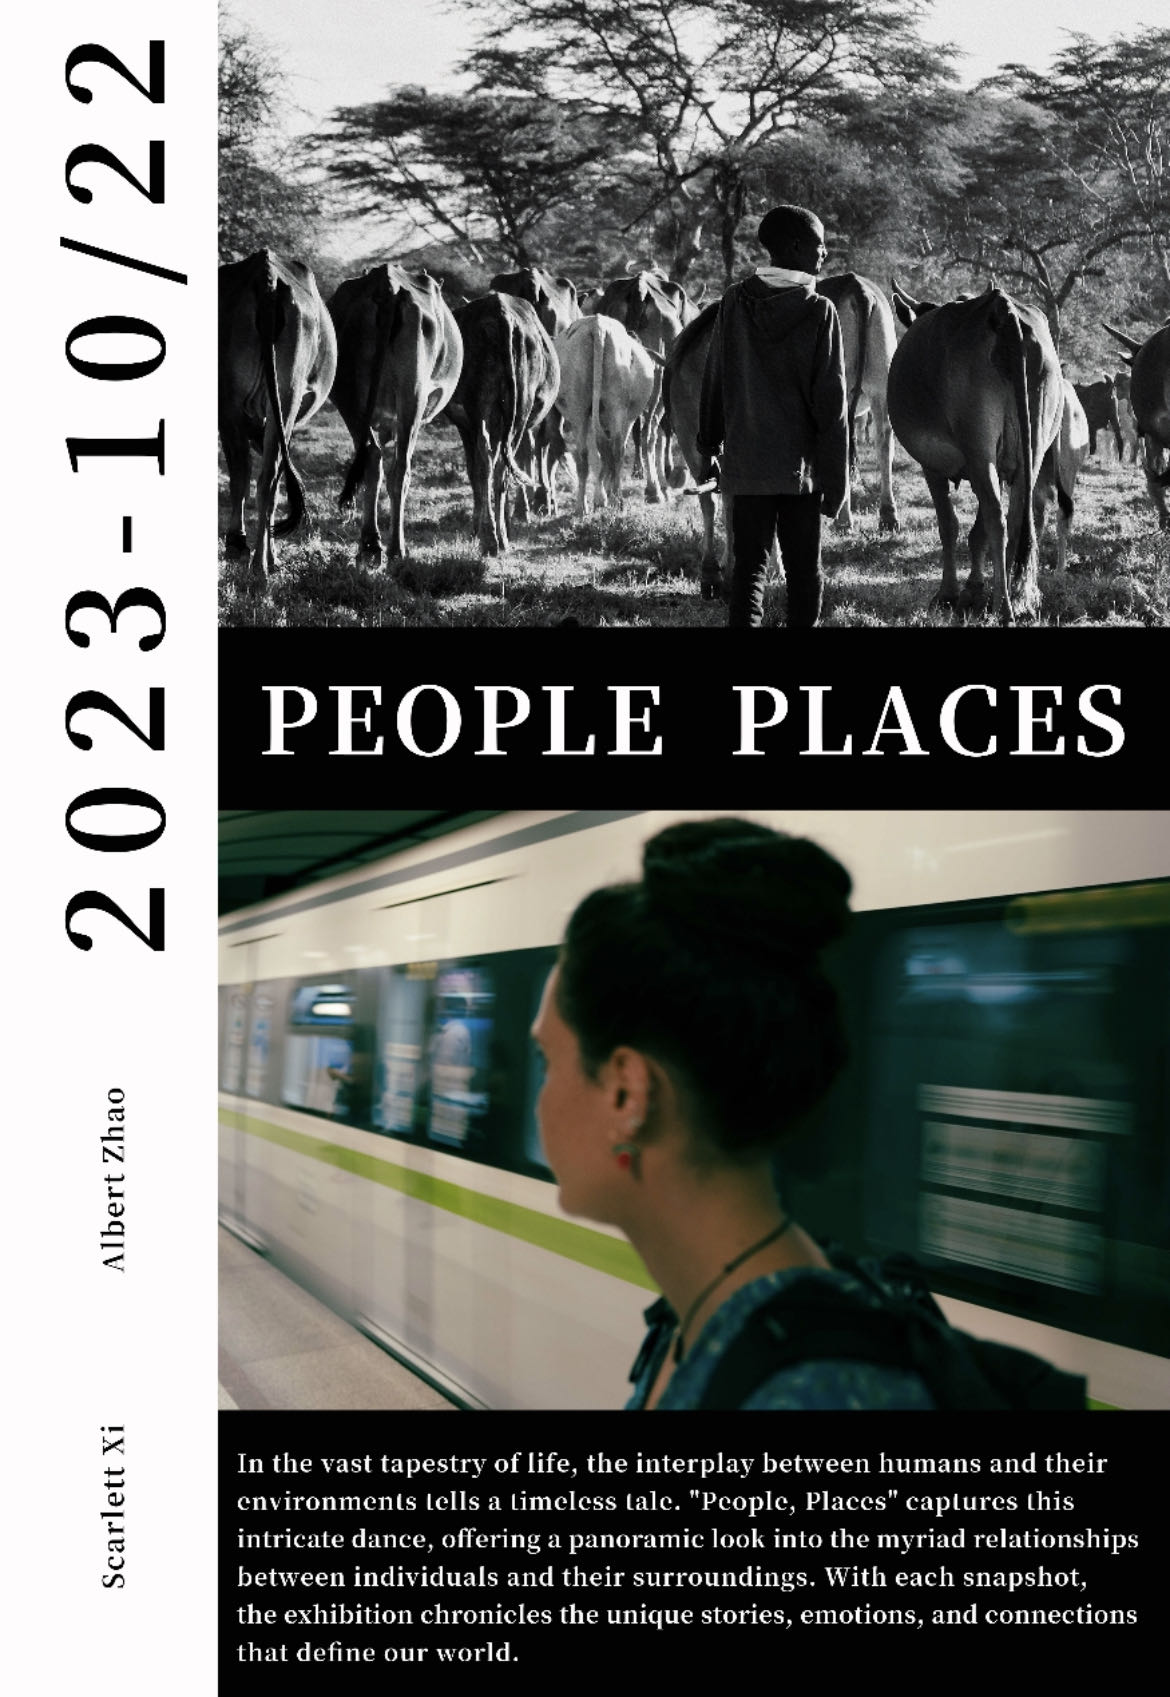 people place exhibition poster